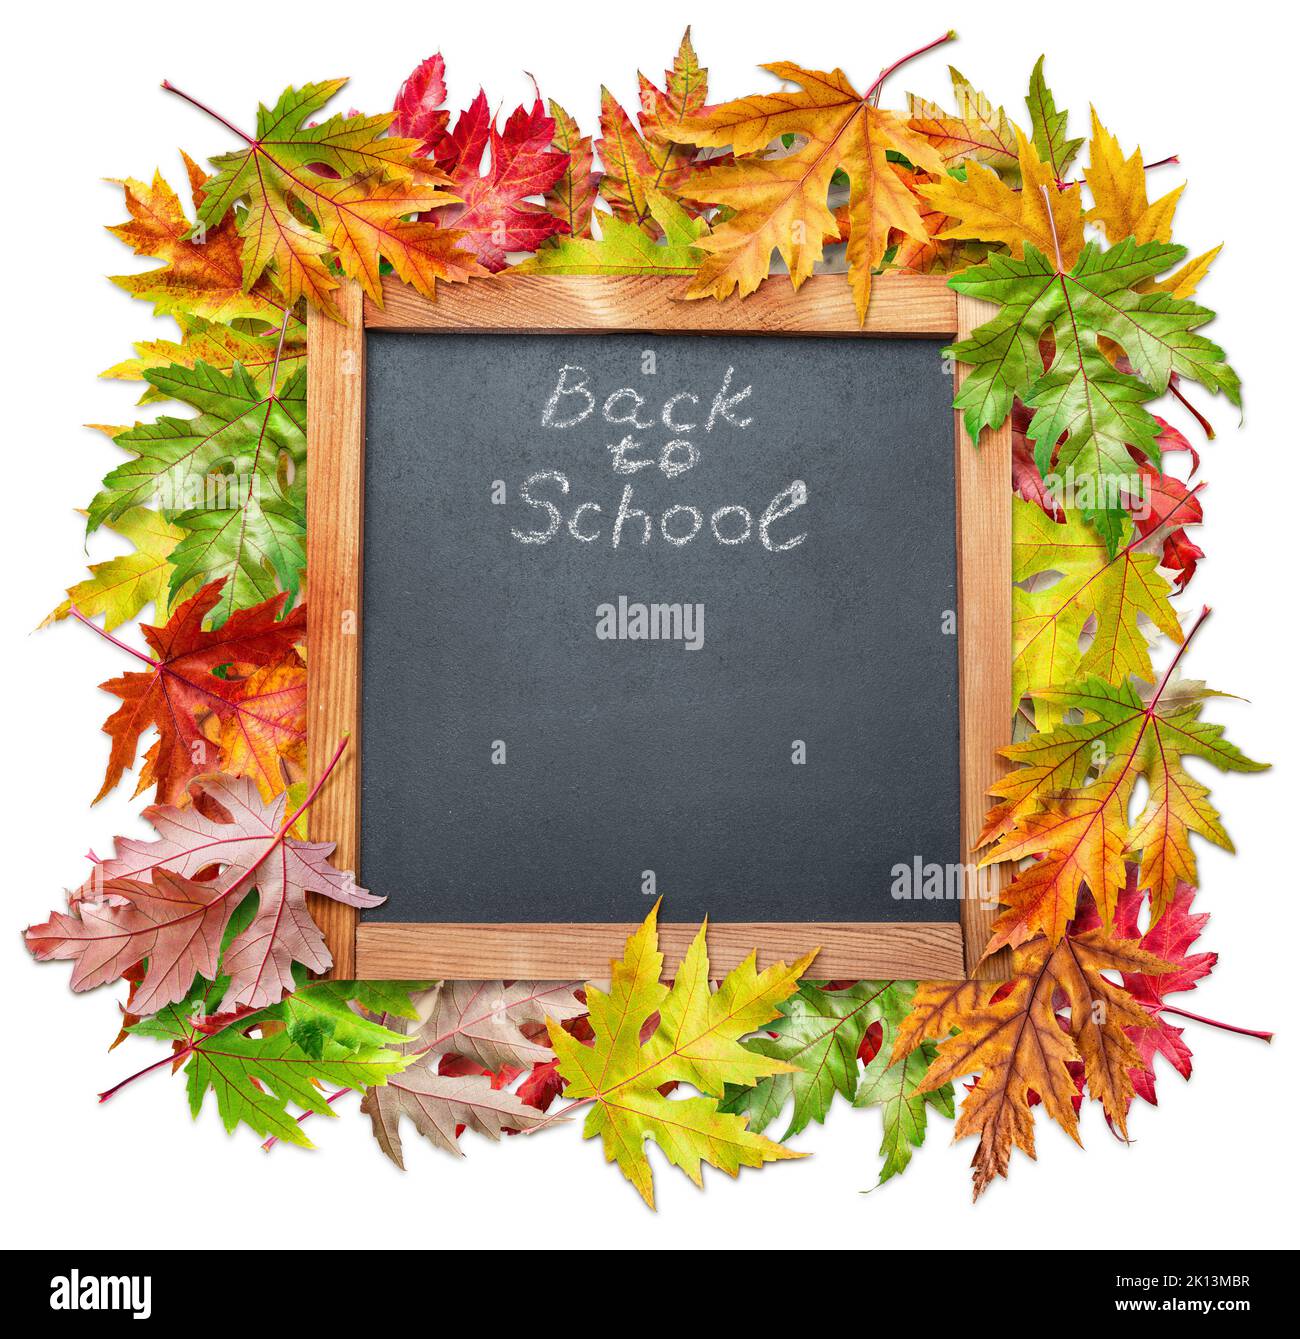 Blackboard inscribed in chalk 'Back to school' among colorful autumn leaves. White background. Stock Photo